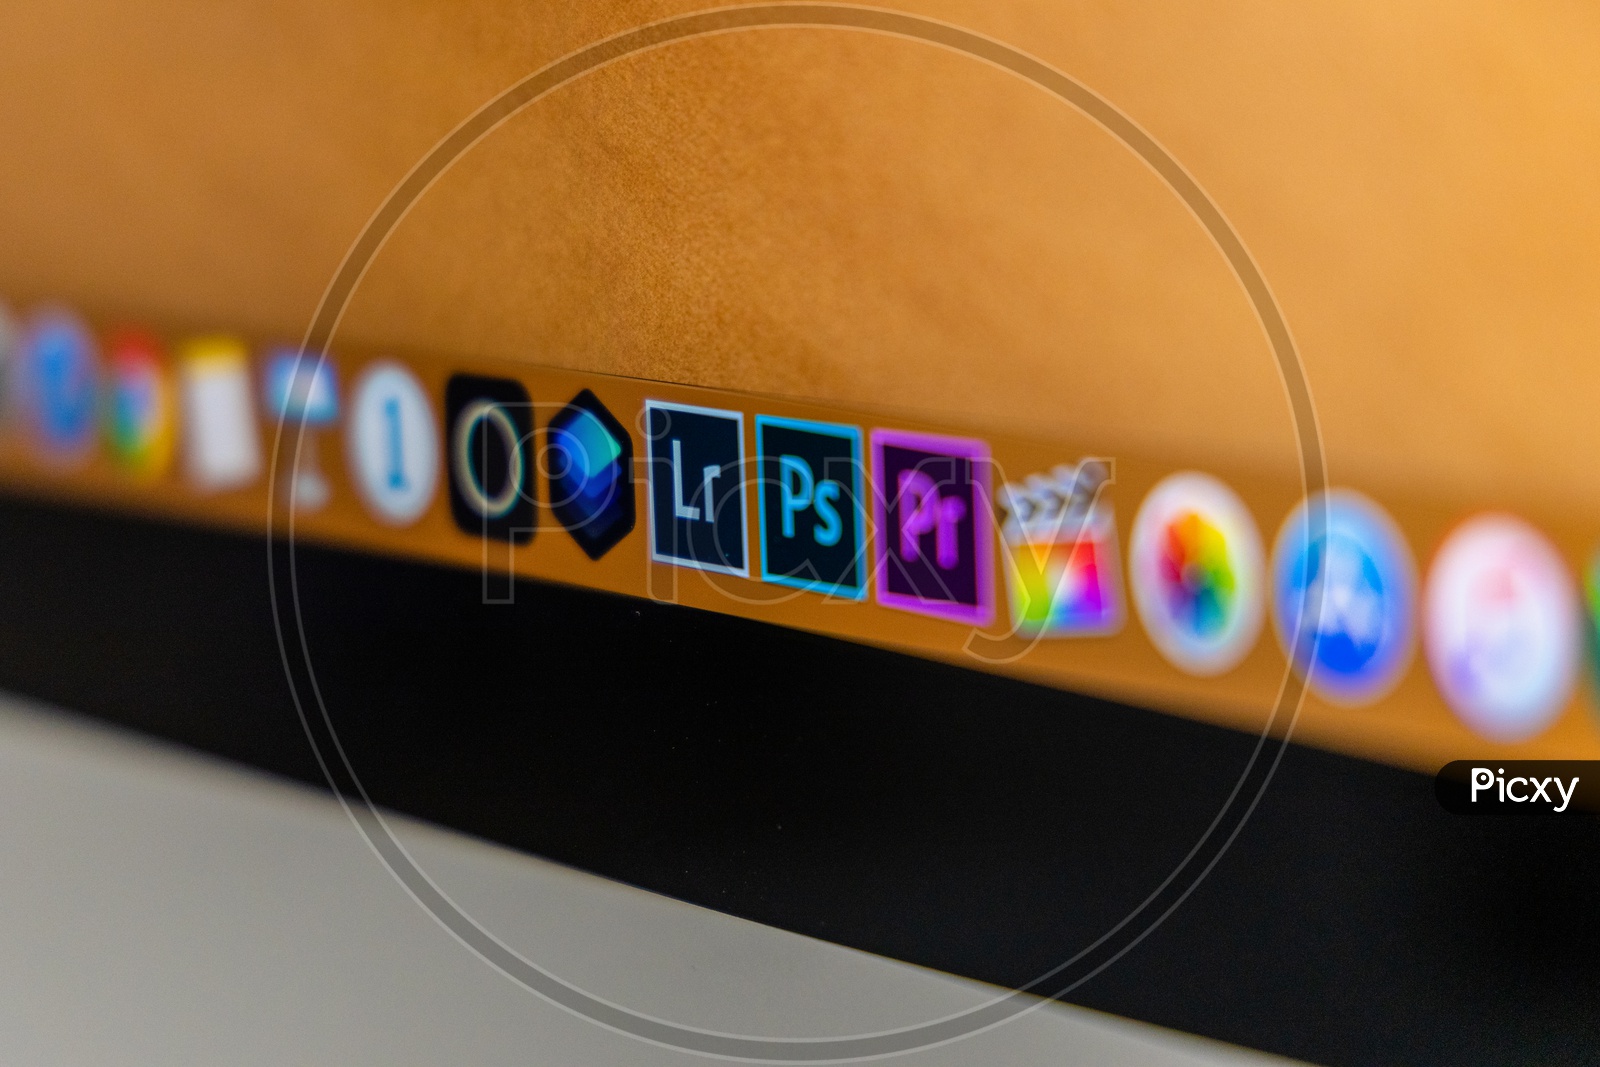 Adobe Lightroom Classic  ( LR ) And  Adobe Photoshop ( PS )  Installed Or Icons On a Desktop Or Computer Screen  Closeup